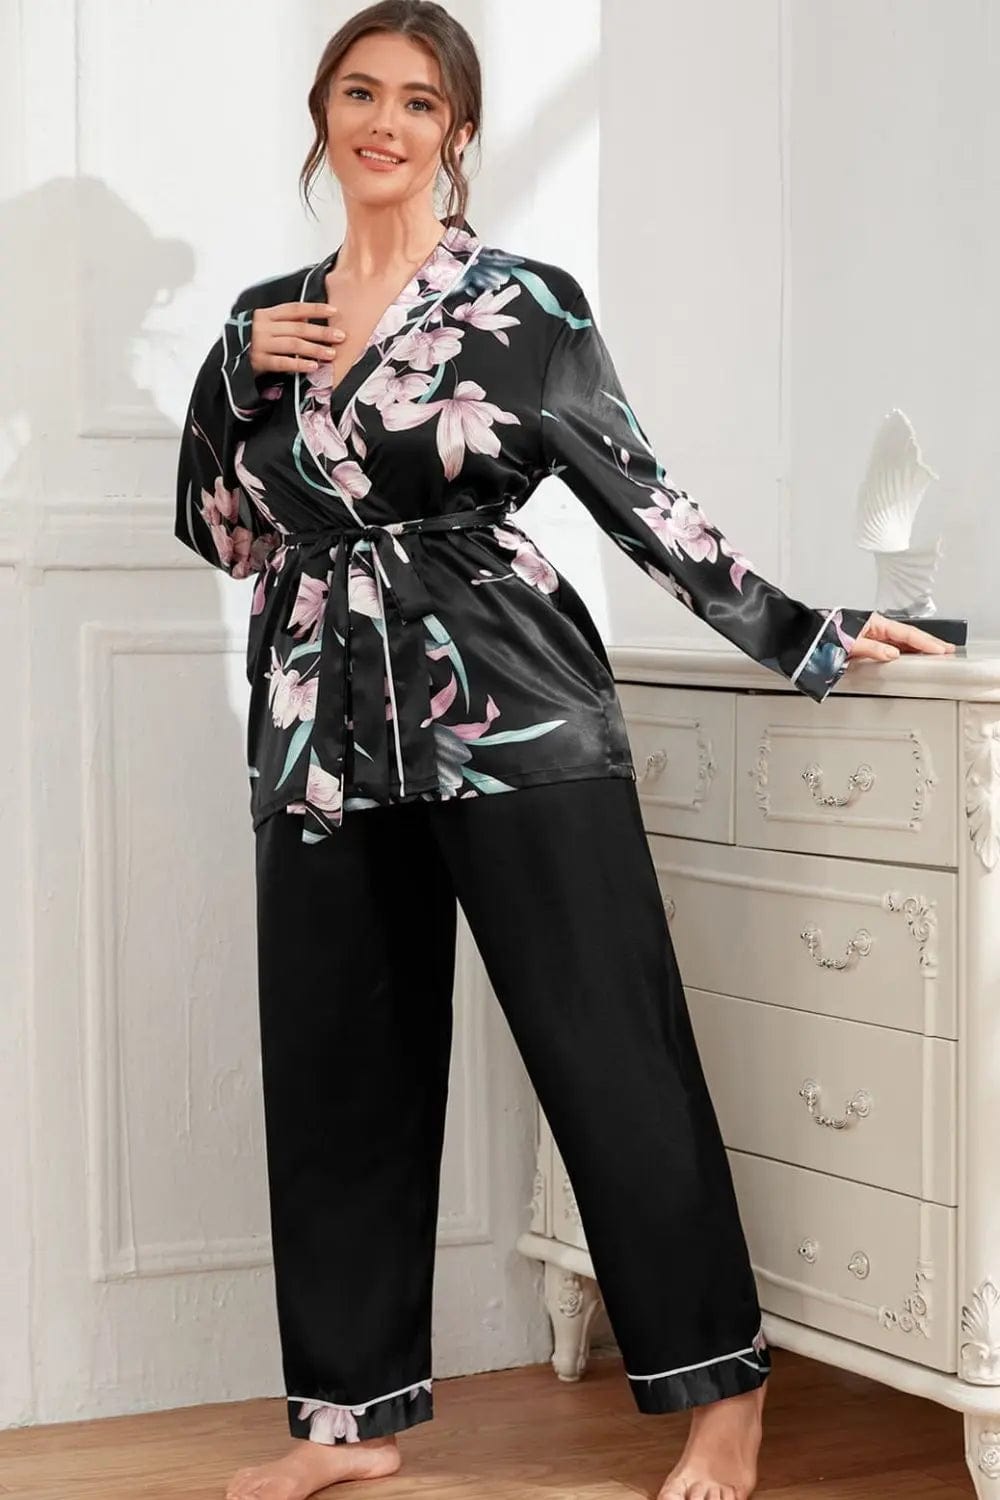 Plus Size Floral Belted Robe and Pants Pajama Set - CLASSY CLOSET BOUTIQUEPlus Size Floral Belted Robe and Pants Pajama Setloungewear plus100100798570977100100798570977Black1XL